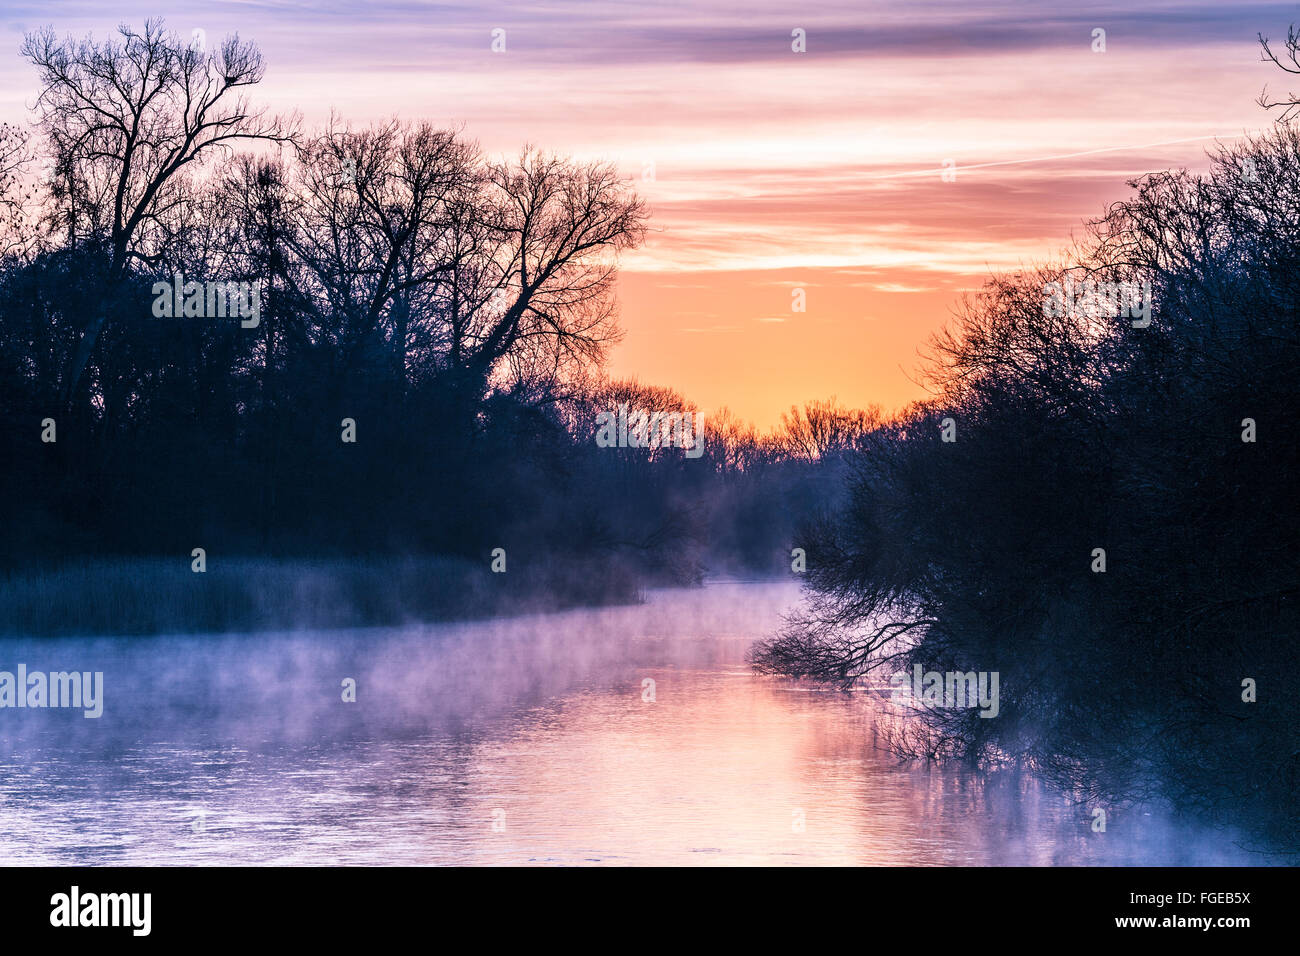 A misty winter sunrise over the River Kennet in Wiltshire. Stock Photo